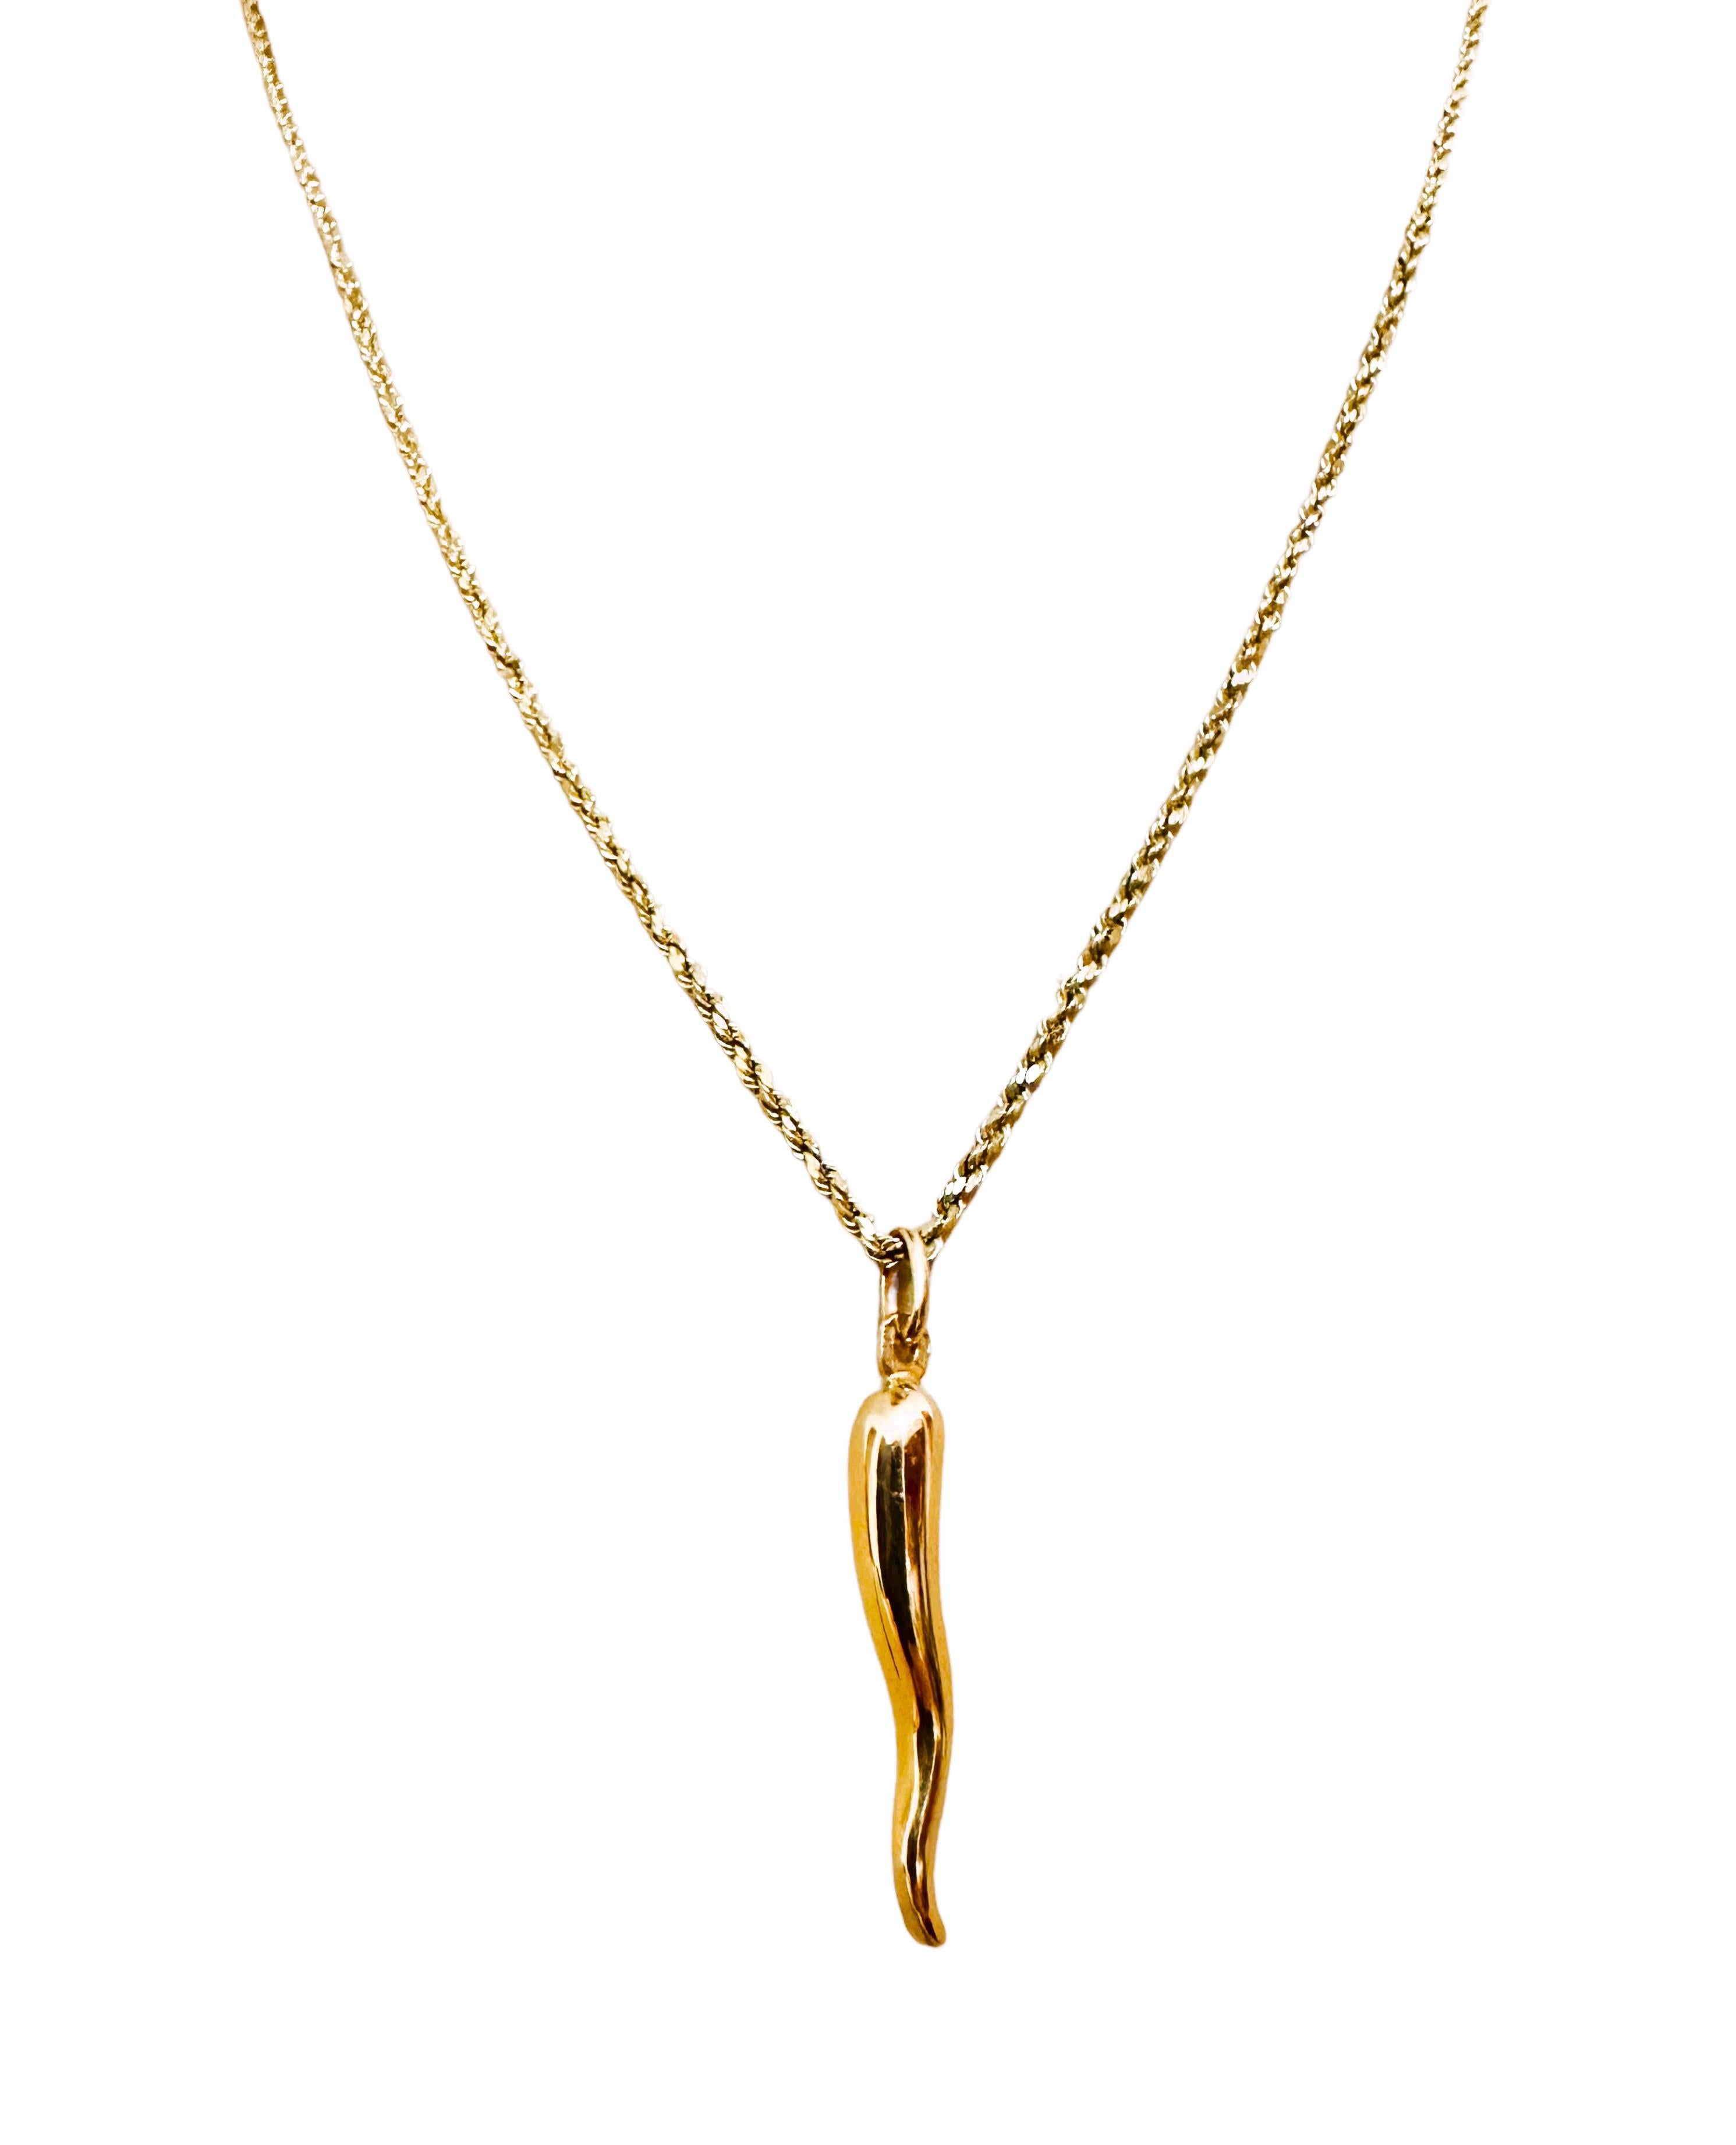 Women's 14k Yellow Gold Italian Horn Necklace and Pendant